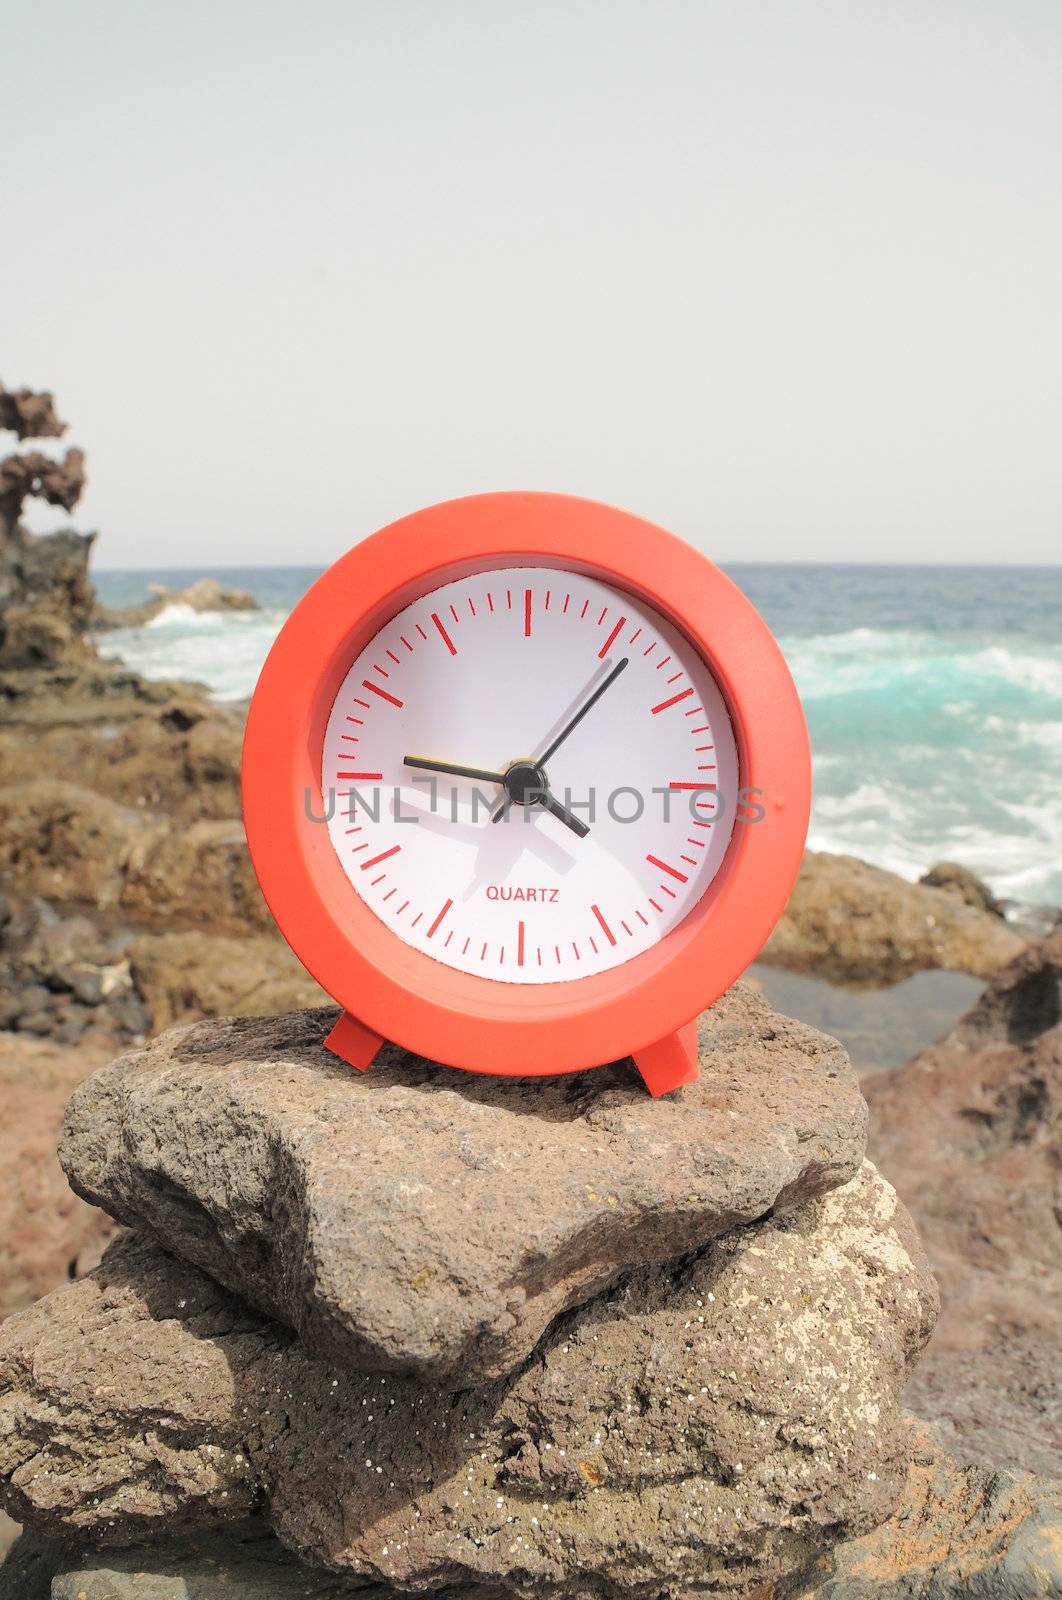 One Red Clock on the Rocks Near the Ocean 